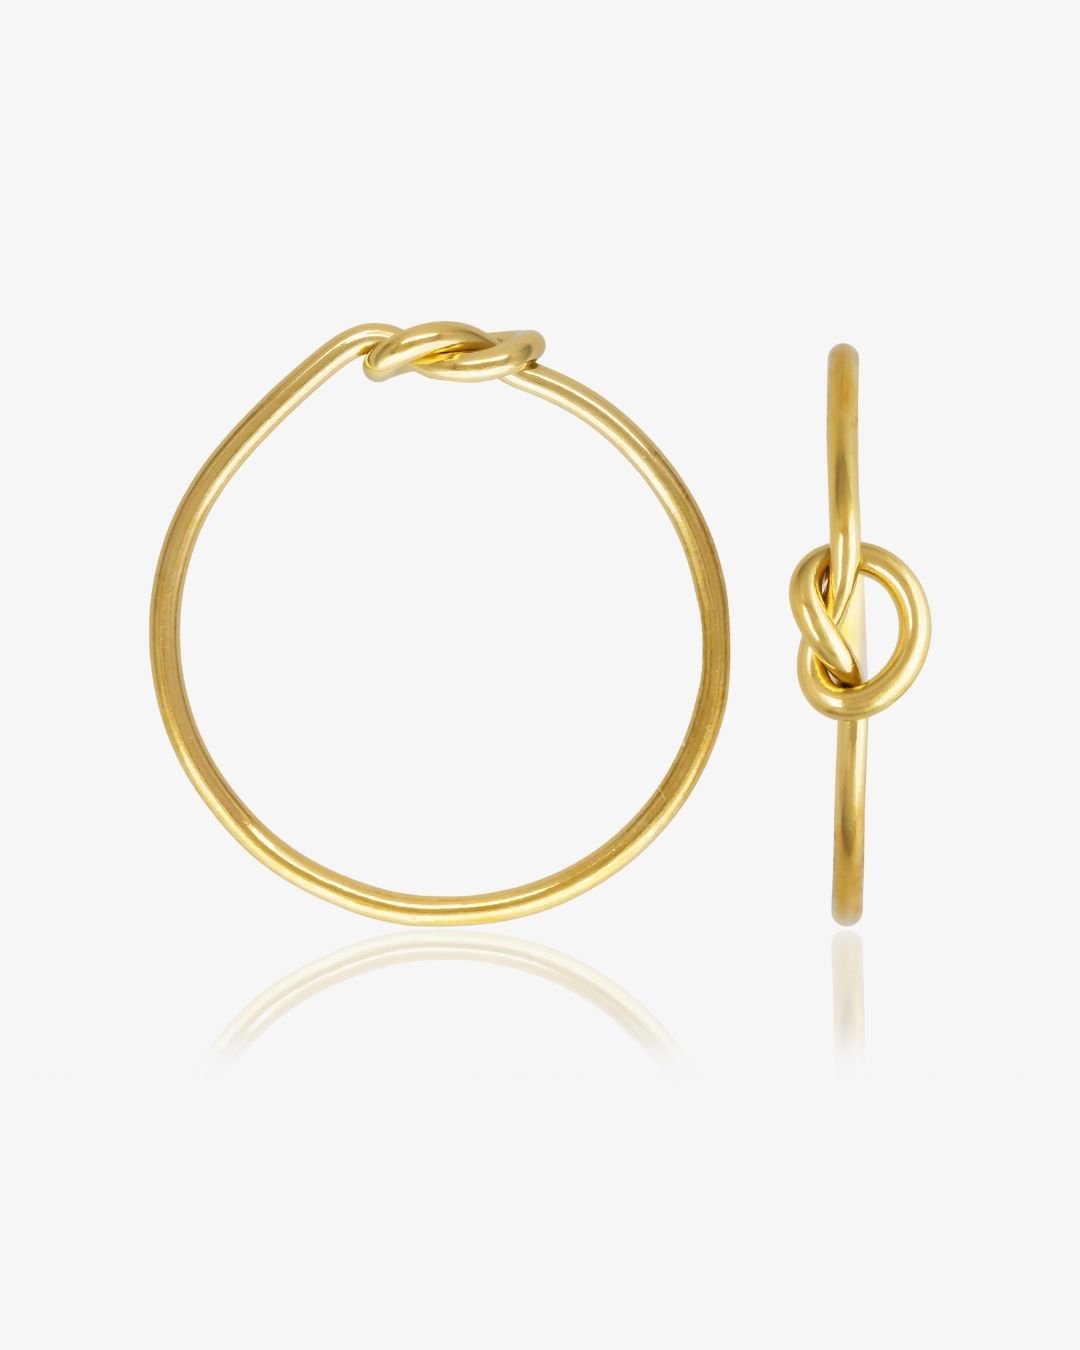 LOVE KNOT RING- 14k Yellow Gold Fill - The Littl - 5 - Rings